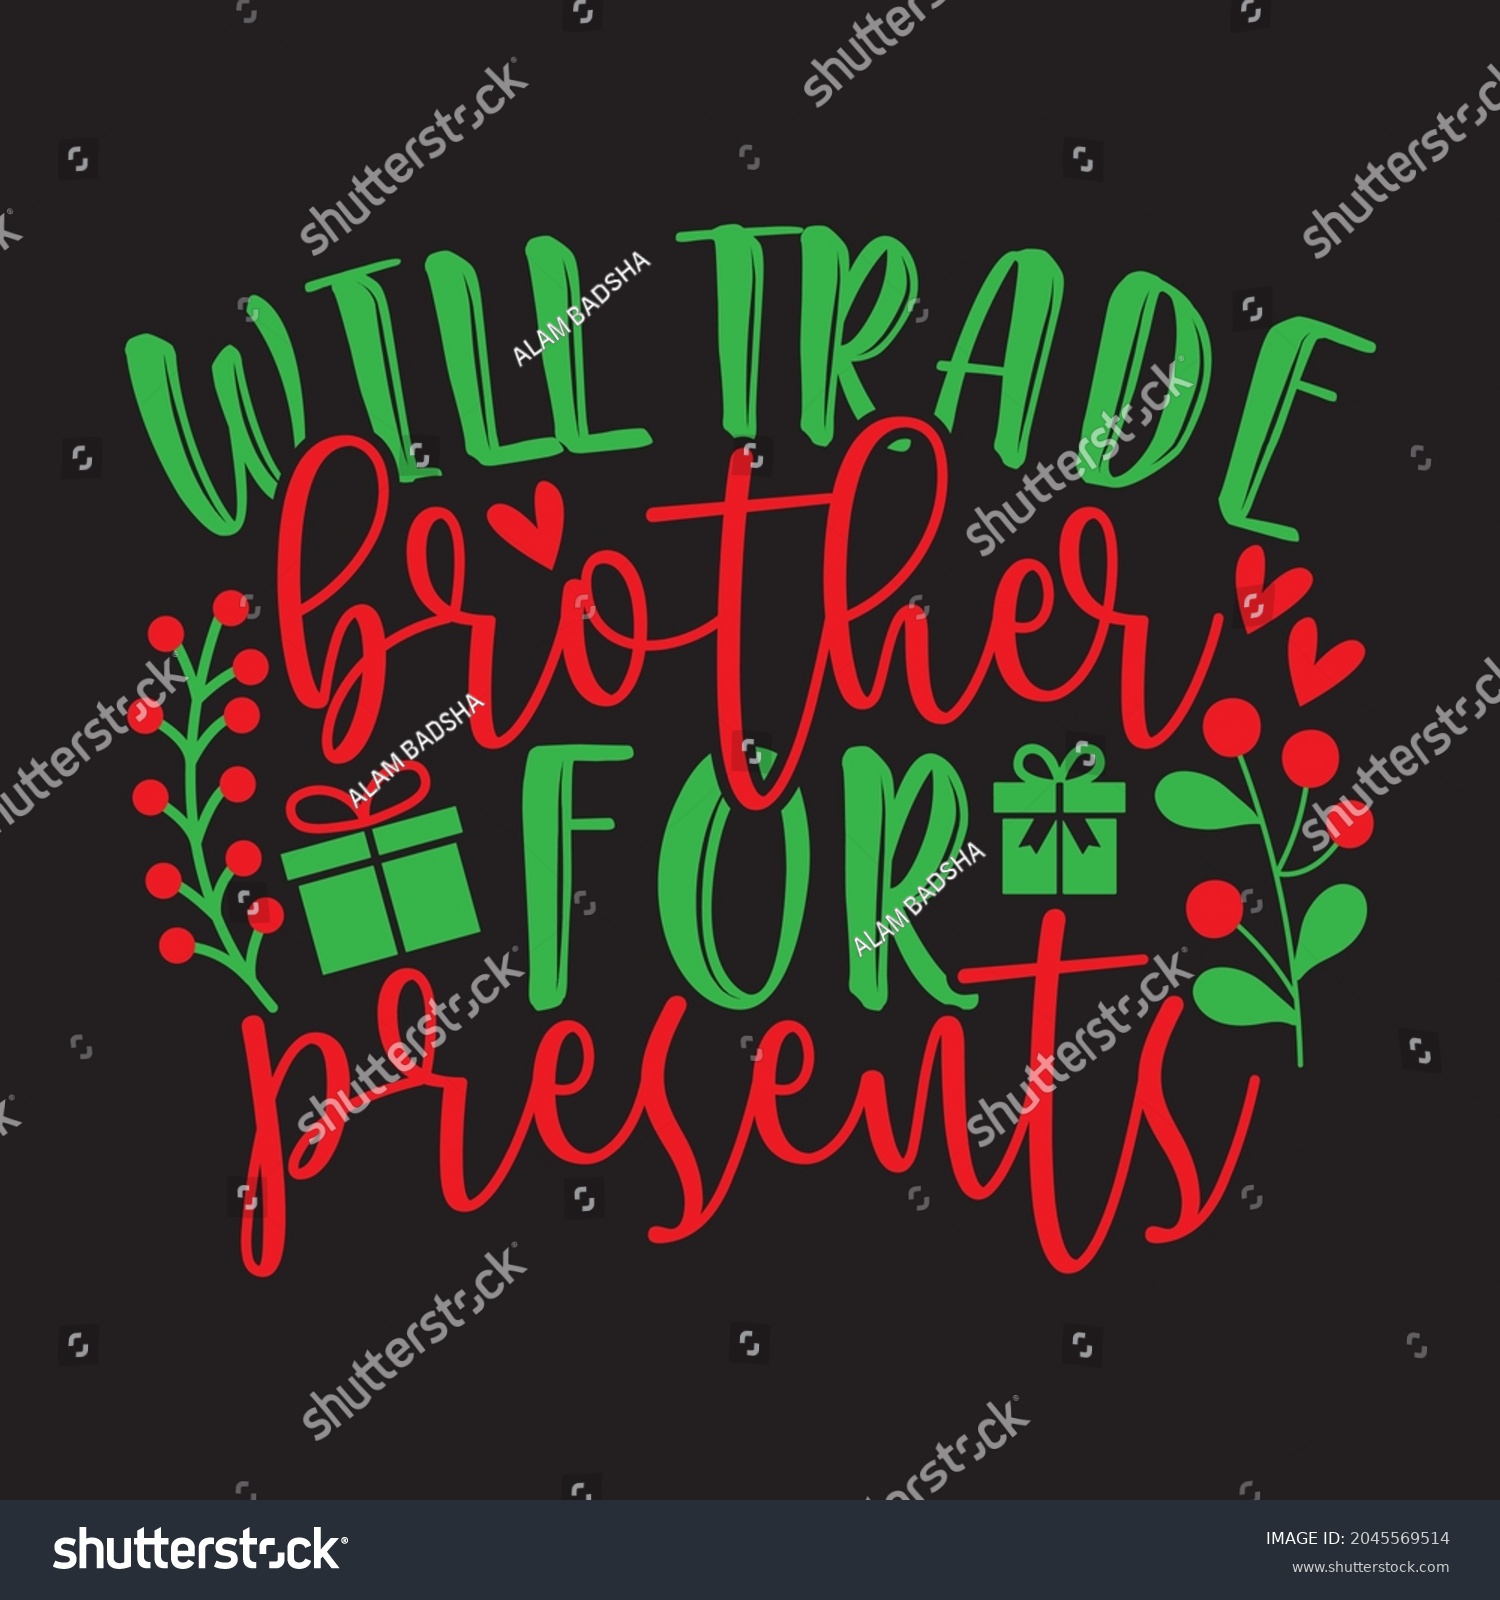 SVG of Will Trade Brother For Presents - Christmas T-shirt Design, Vector Files. svg